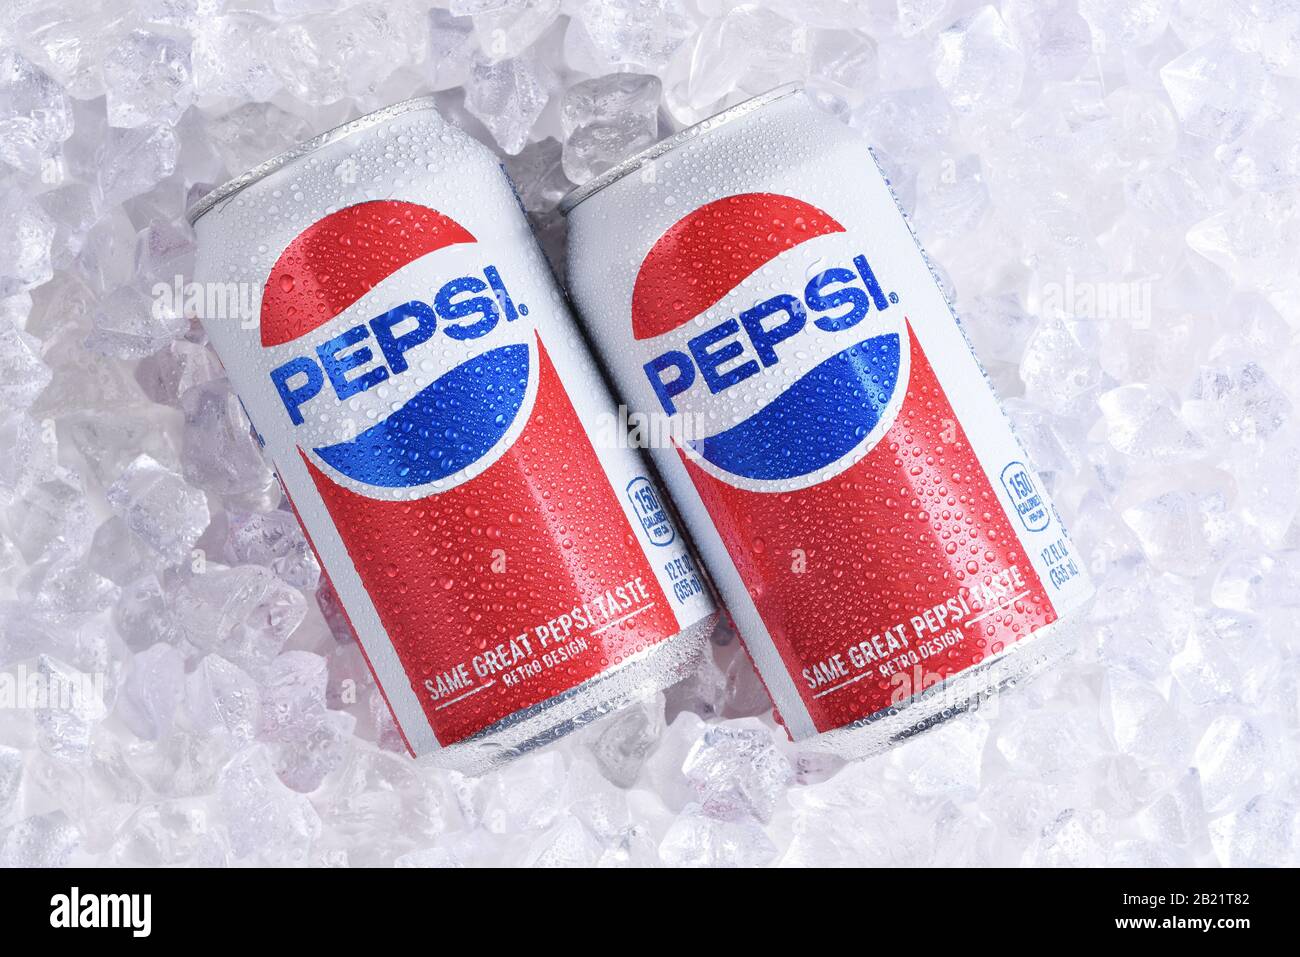 IRVINE, CALIFORNIA - MAY 23, 2018: Two cans of Pepsi-Cola on ice. Pepsi is one of the leading producers of soda and soft drinks in the USA. Stock Photo